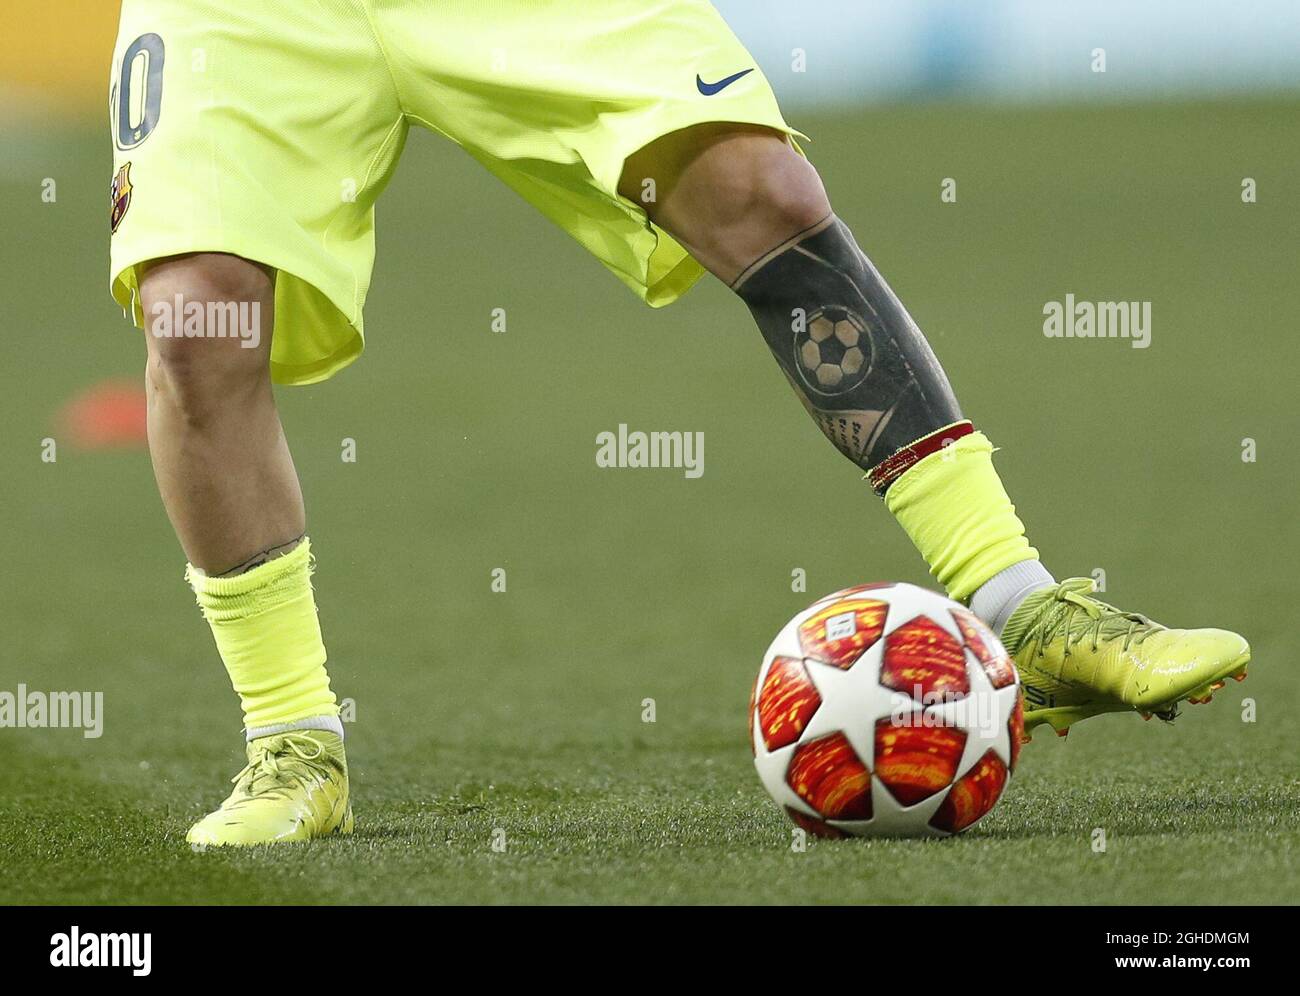 Tattoo On The Leg Of Lionel Messi Of Barcelona During The Uefa Champions League Match At Old Trafford Manchester Picture Date 10th April 19 Picture Credit Should Read Darren Staples Sportimage Via Pa